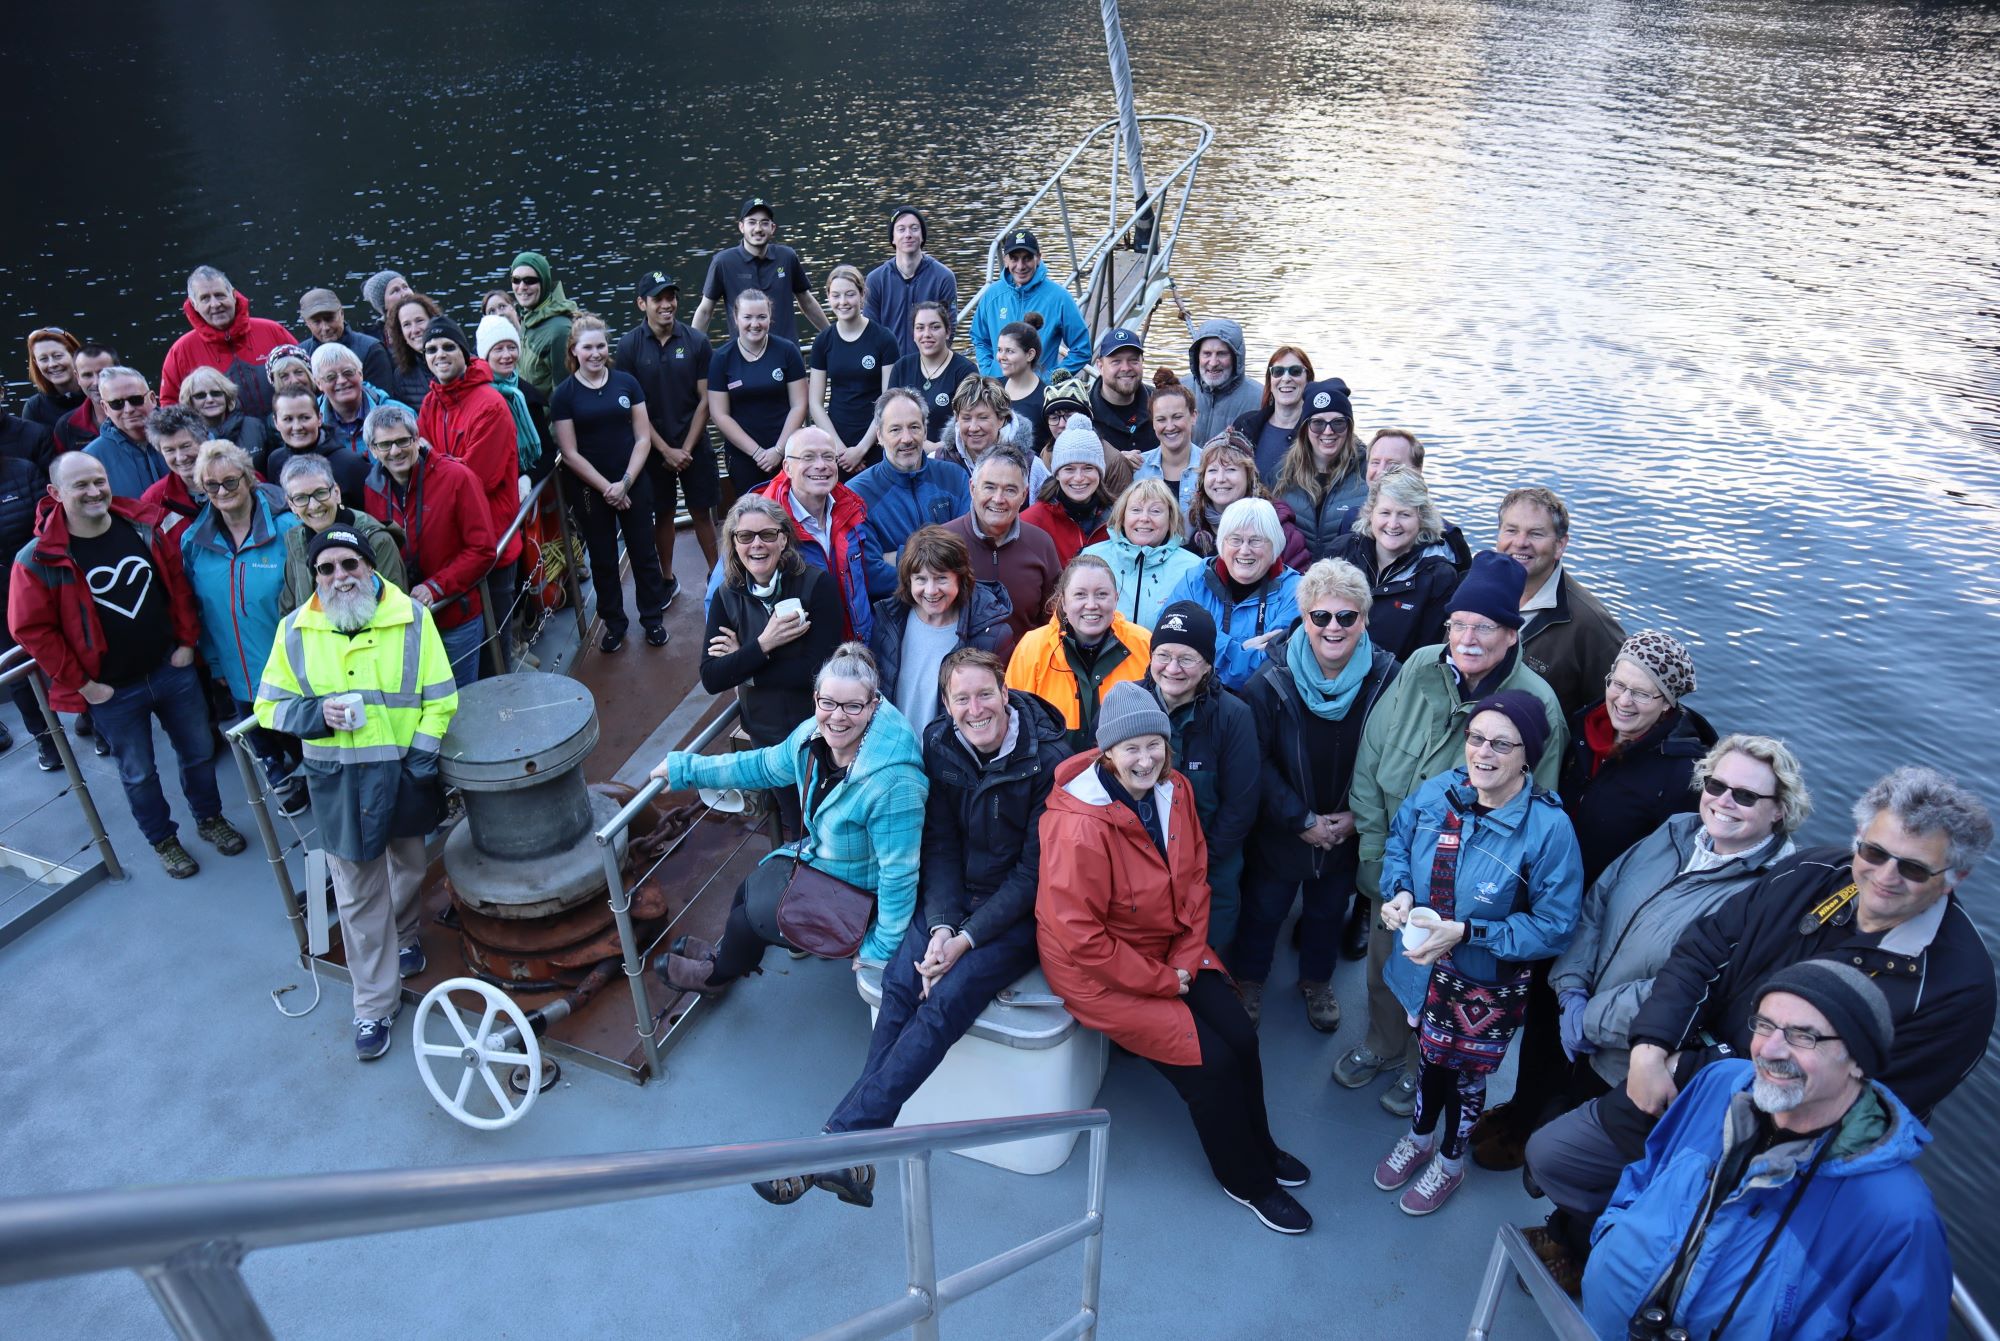 Wildlife Hospital Supporters on board the Milford Mariner